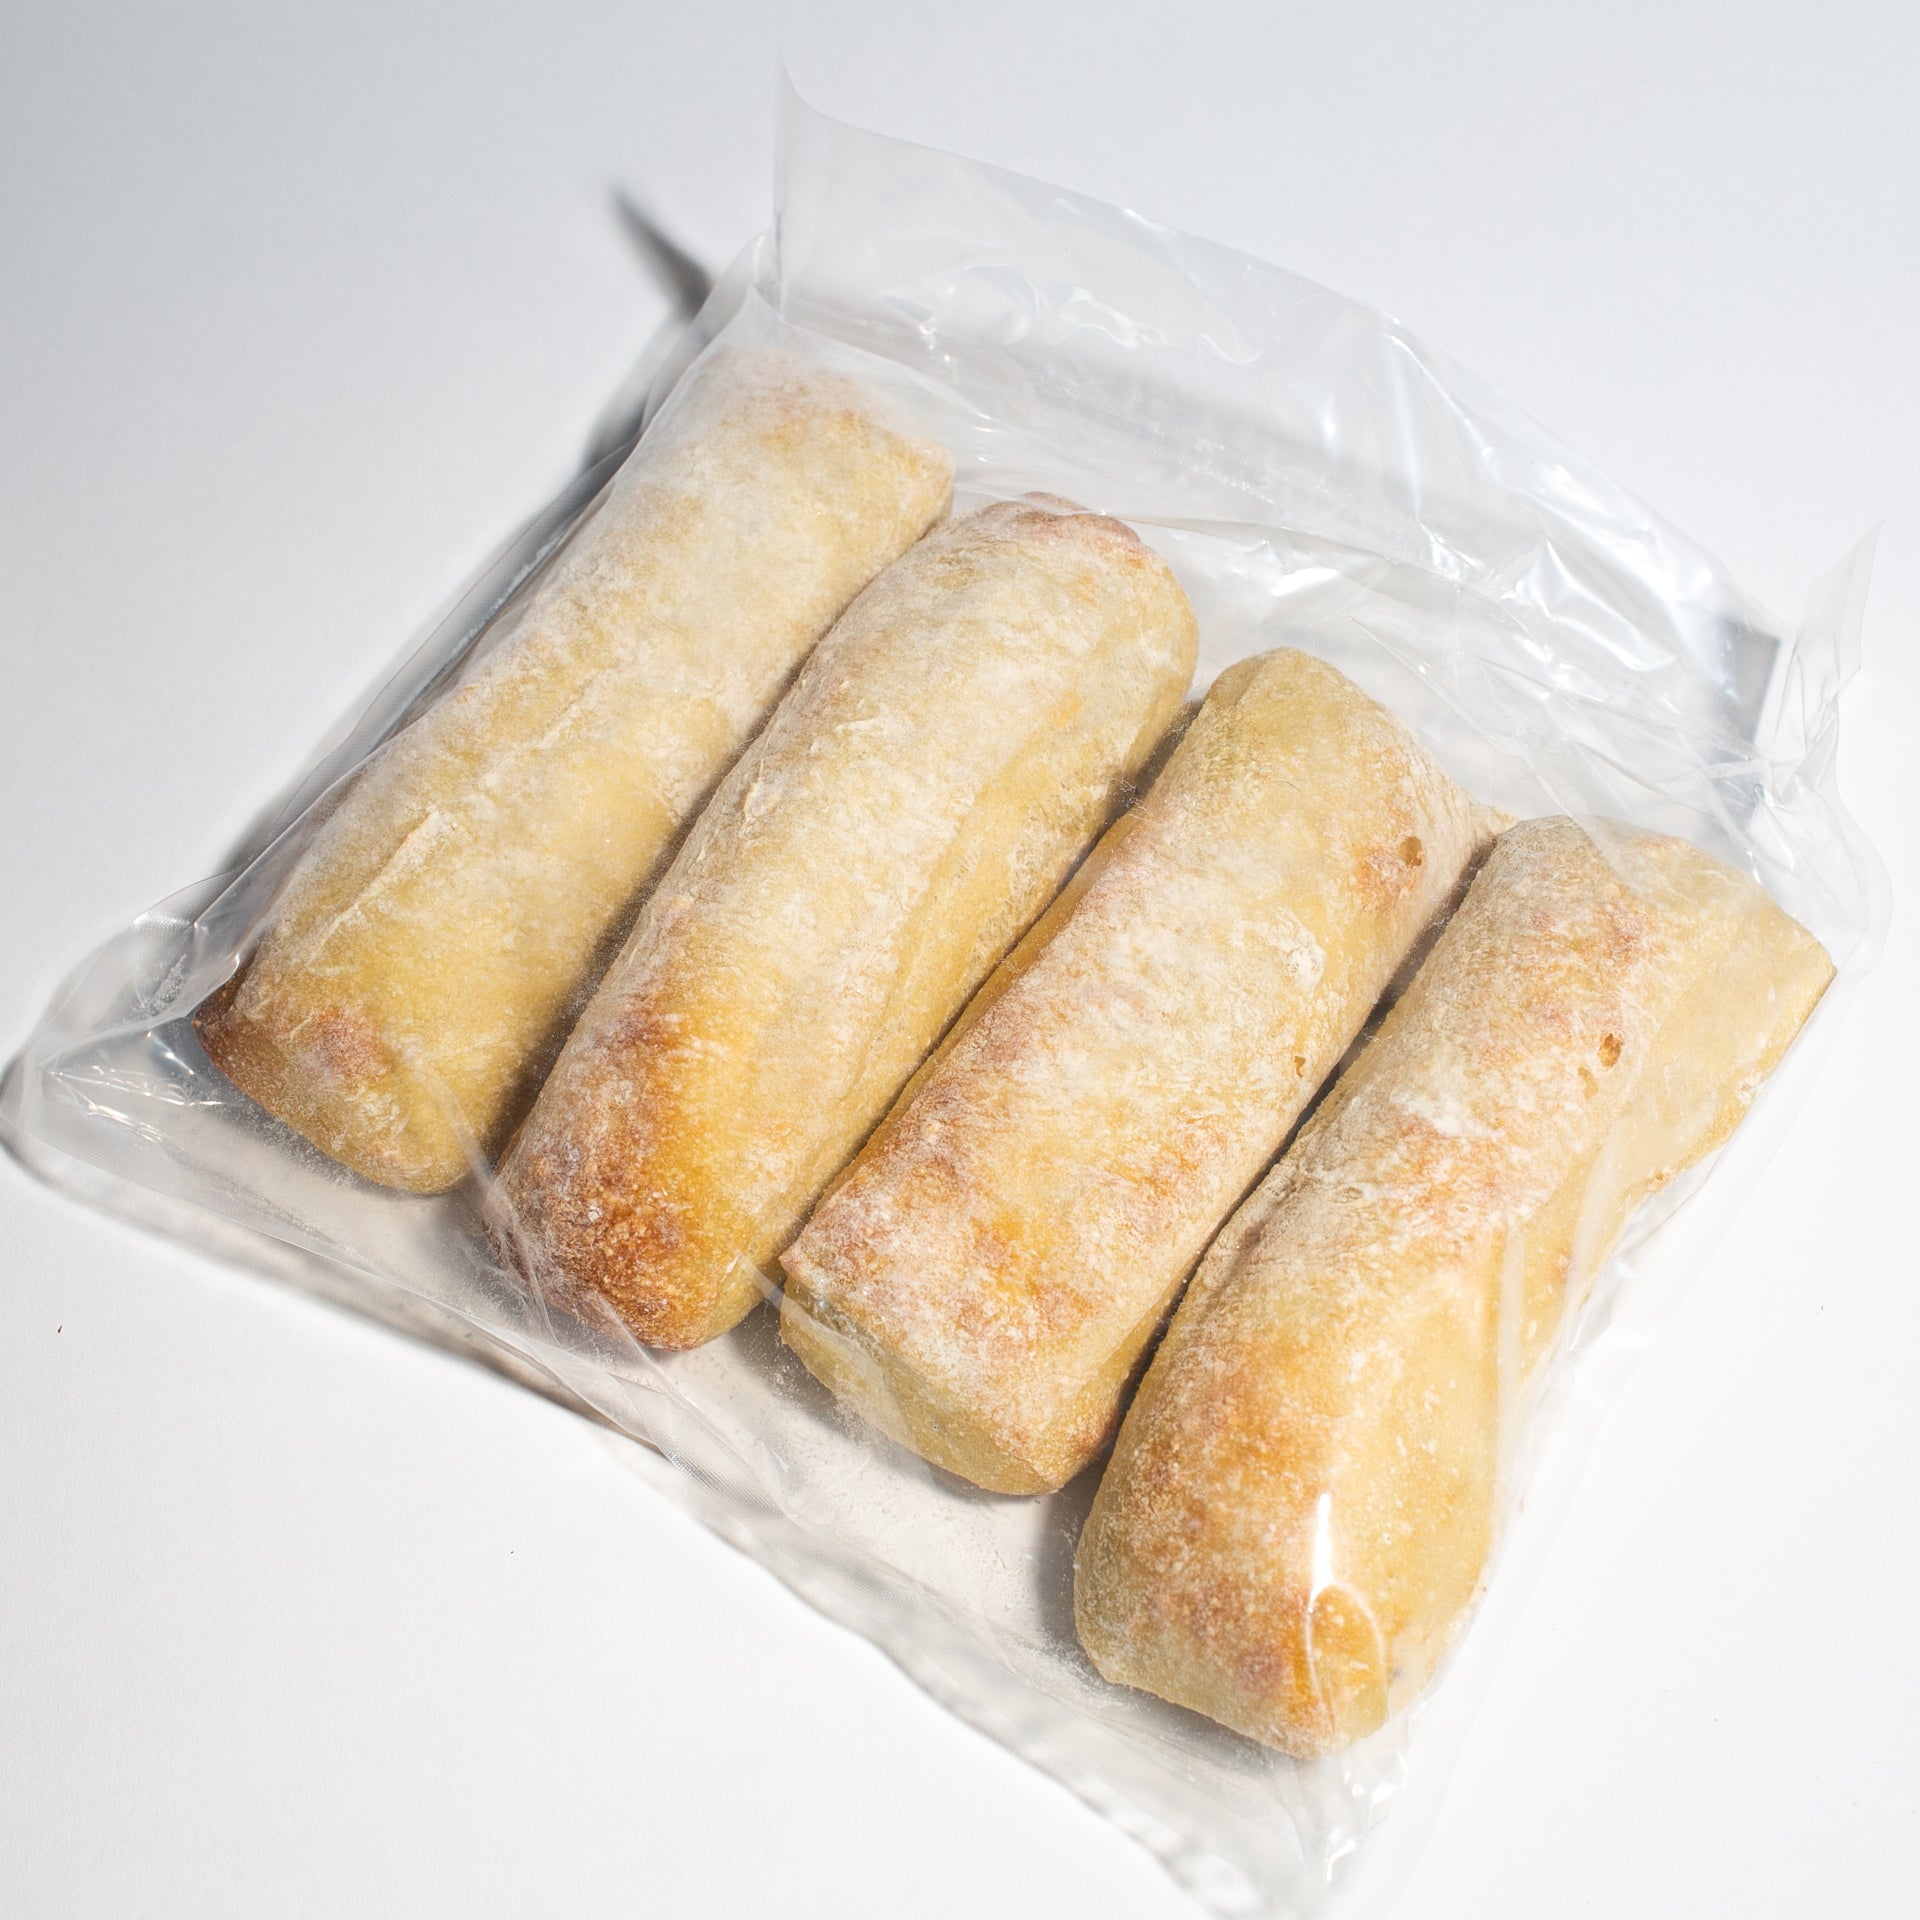 Frozen to oven demi baguettes! - Yann Haute Patisserie, authentic French bakery for the best desserts, cakes, croissants and macarons in this happy yellow house pastry shop. 